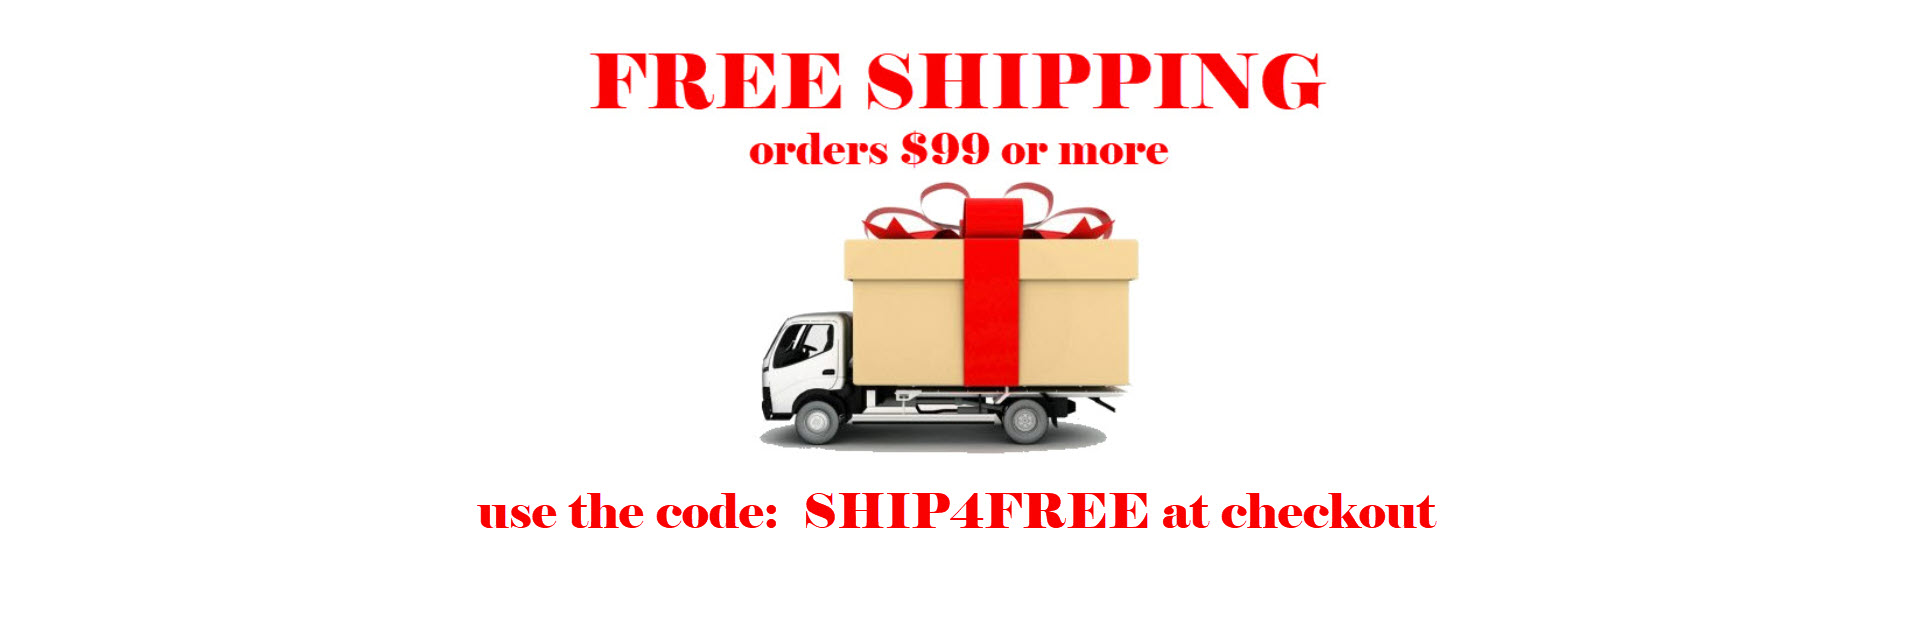 Free Shipping Sale